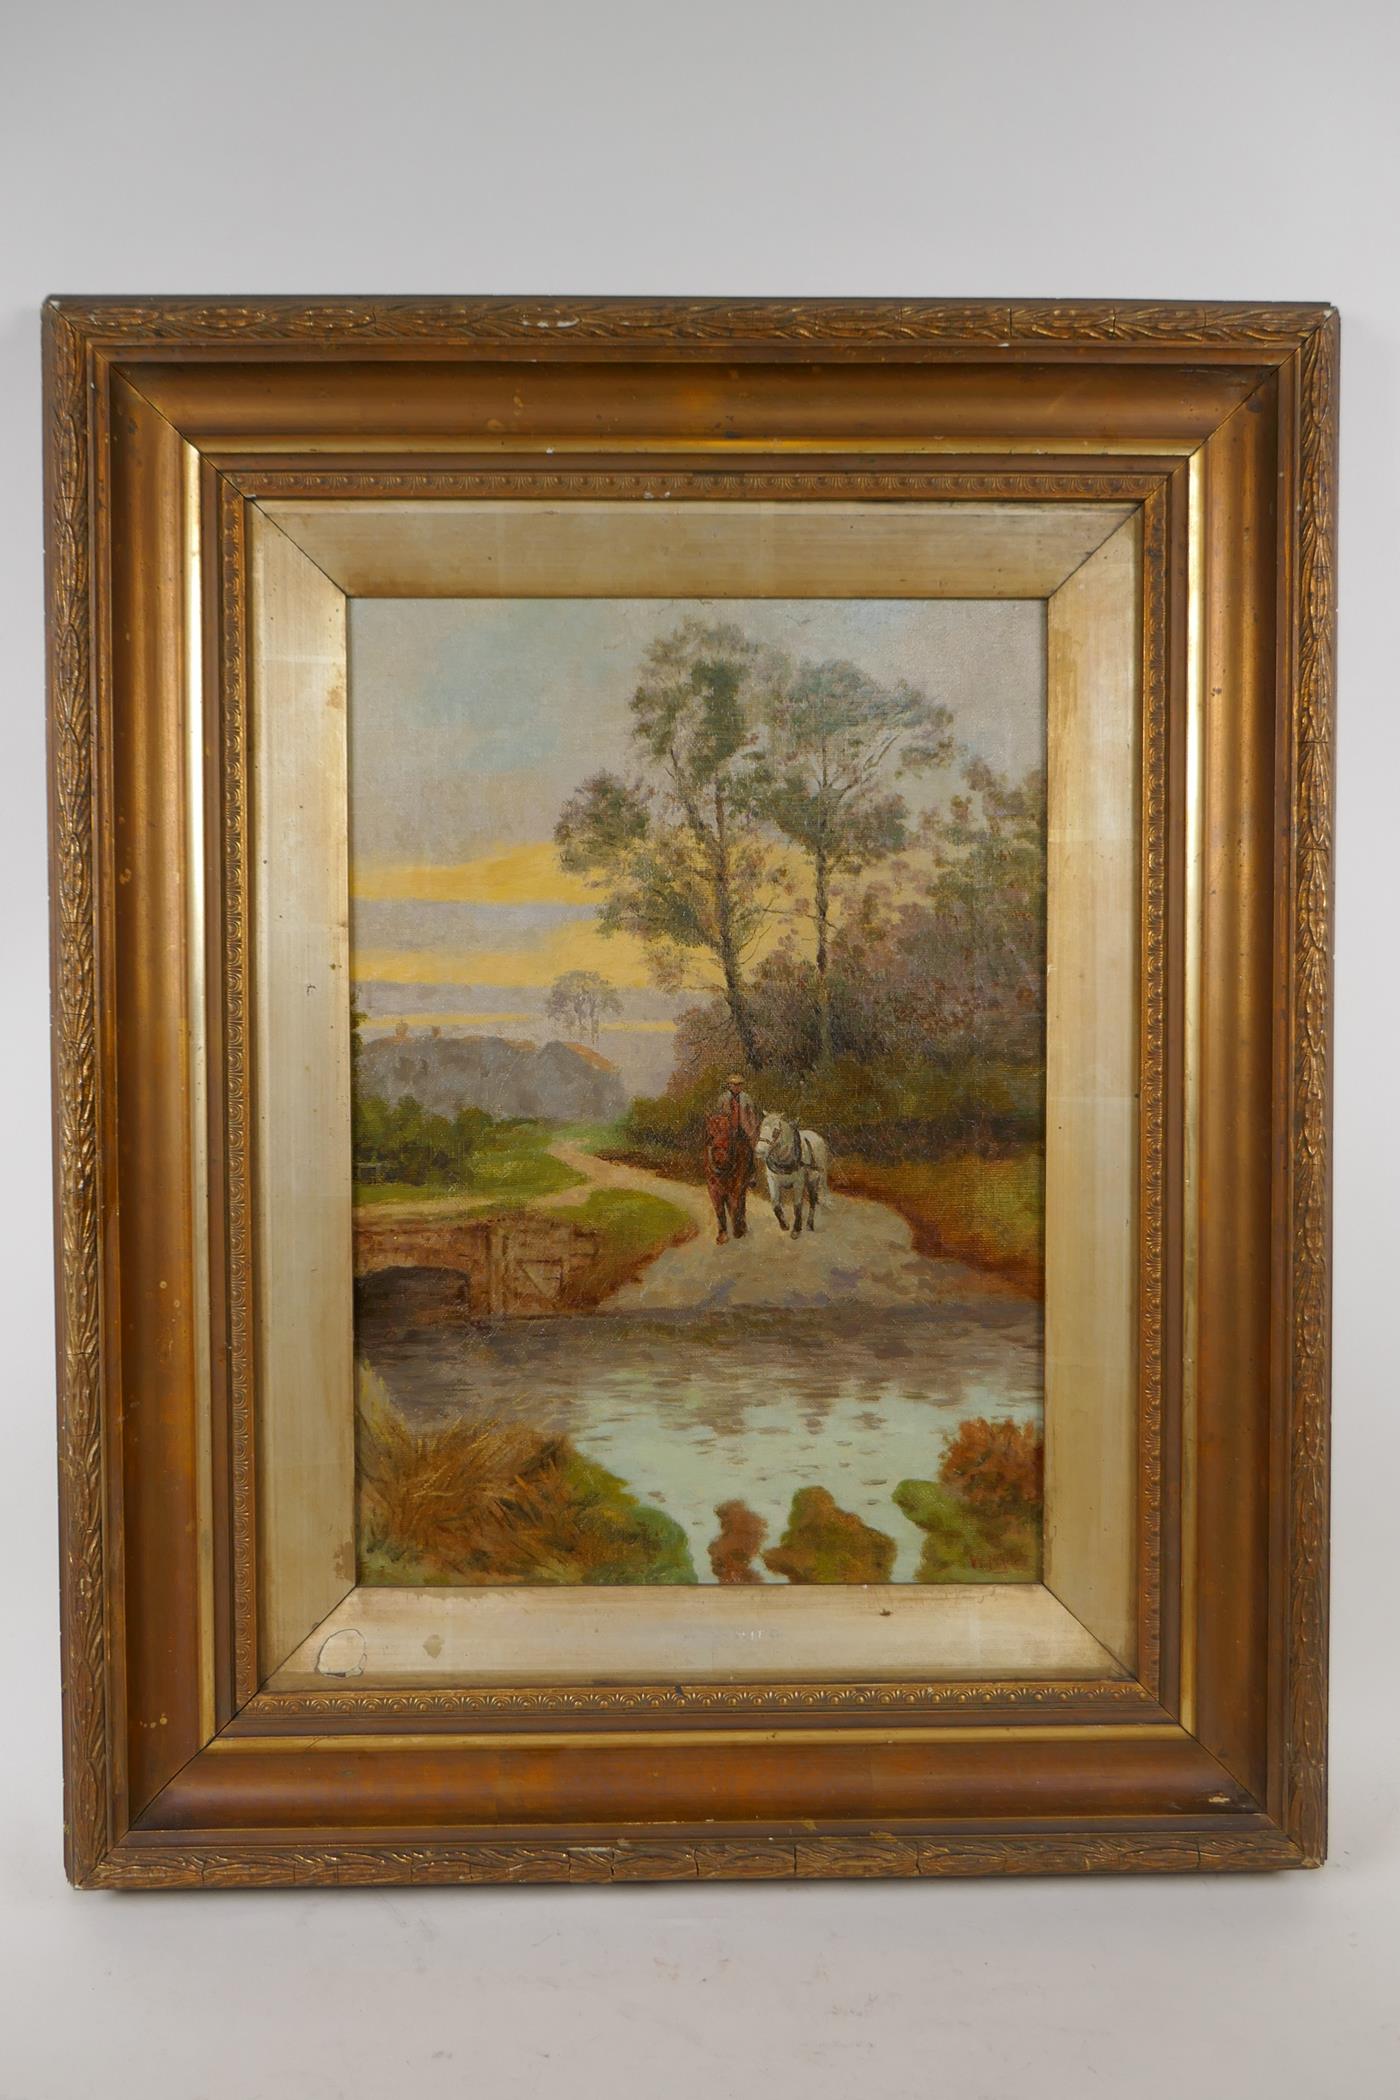 Landscape at sunset with figure and horses, indistinctly signed, C19th oil on canvas, 26cm x 36cm - Image 2 of 5